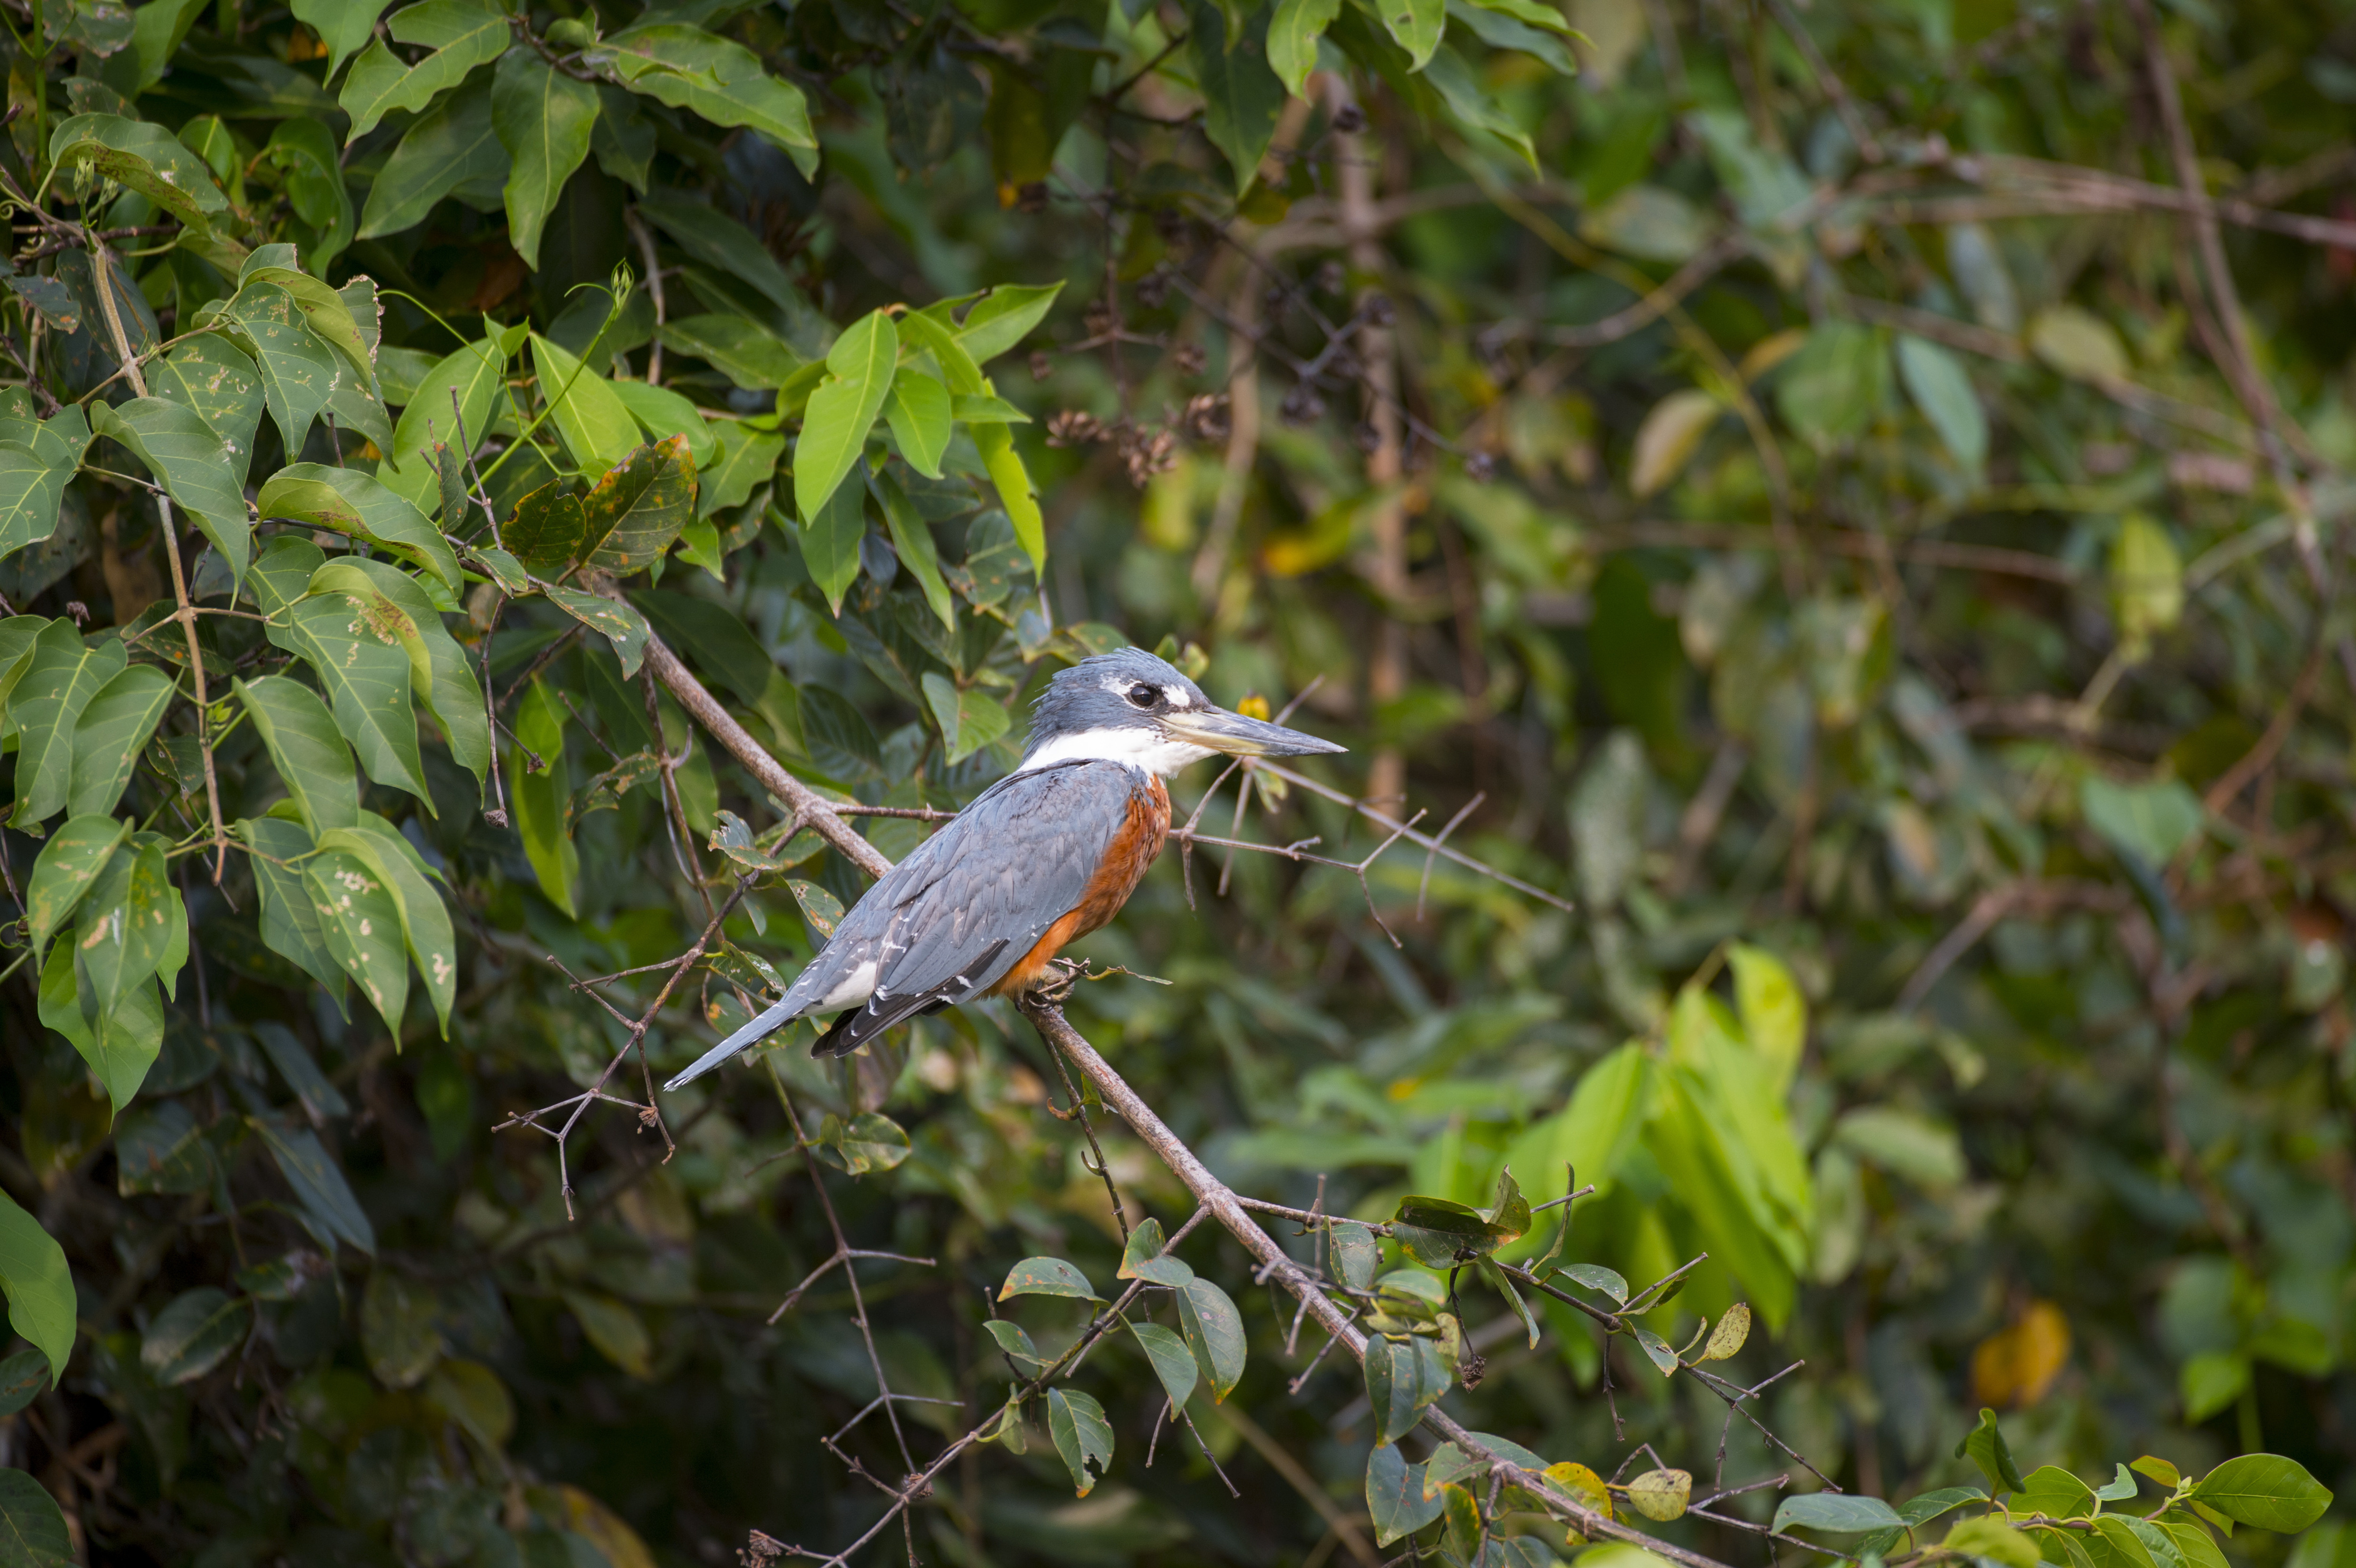 A Belted kingfisher (Megaceryle alcyon) is perched in a bush...